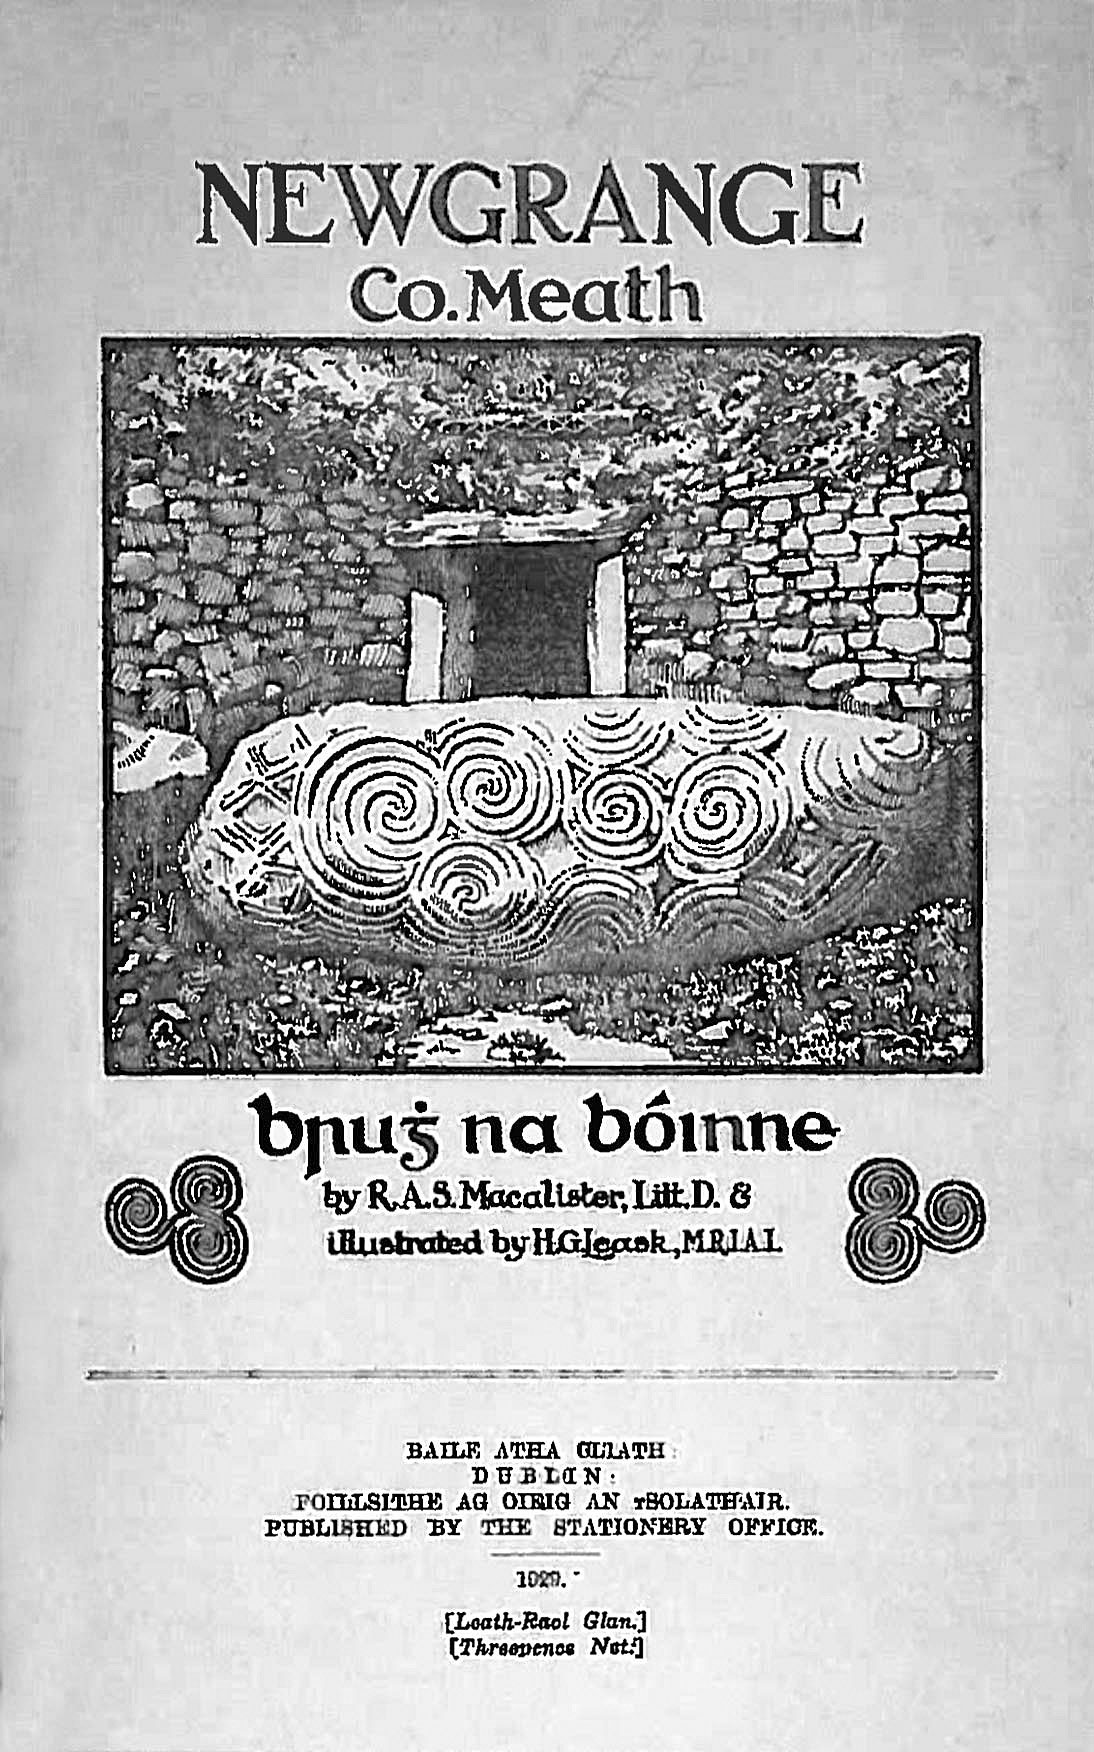 Penny Guide to Newgrange by R. A. S. Macalister.